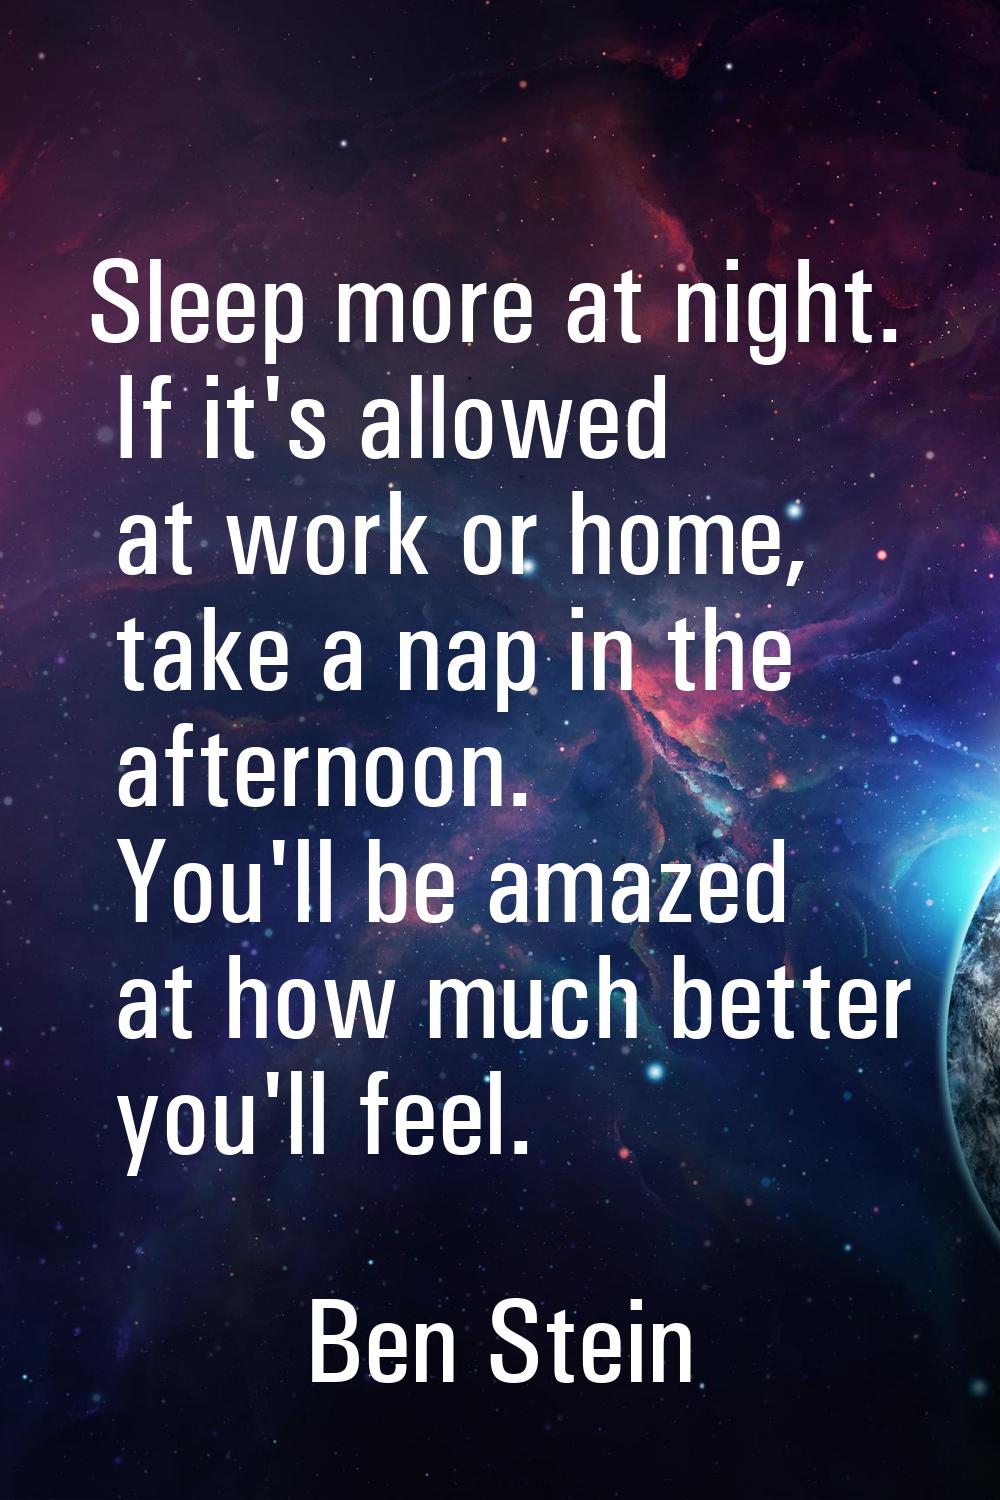 Sleep more at night. If it's allowed at work or home, take a nap in the afternoon. You'll be amazed